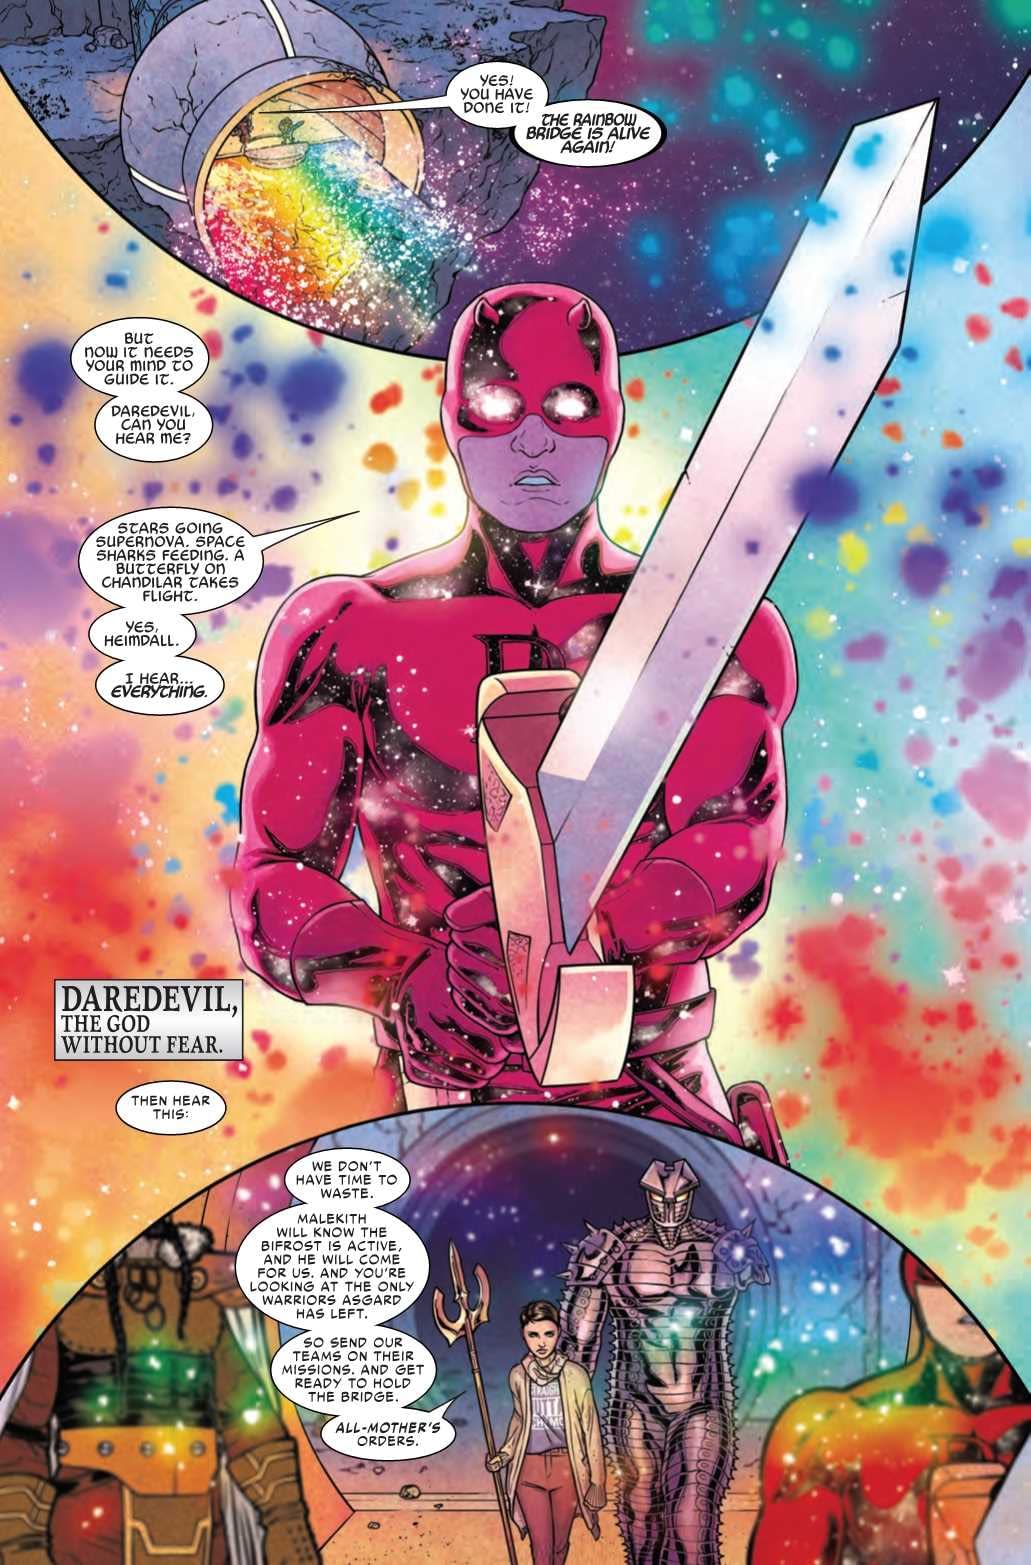 Daredevil Becomes a God and the Avengers Get Flying Horses in War of the Realms #3 (Preview)